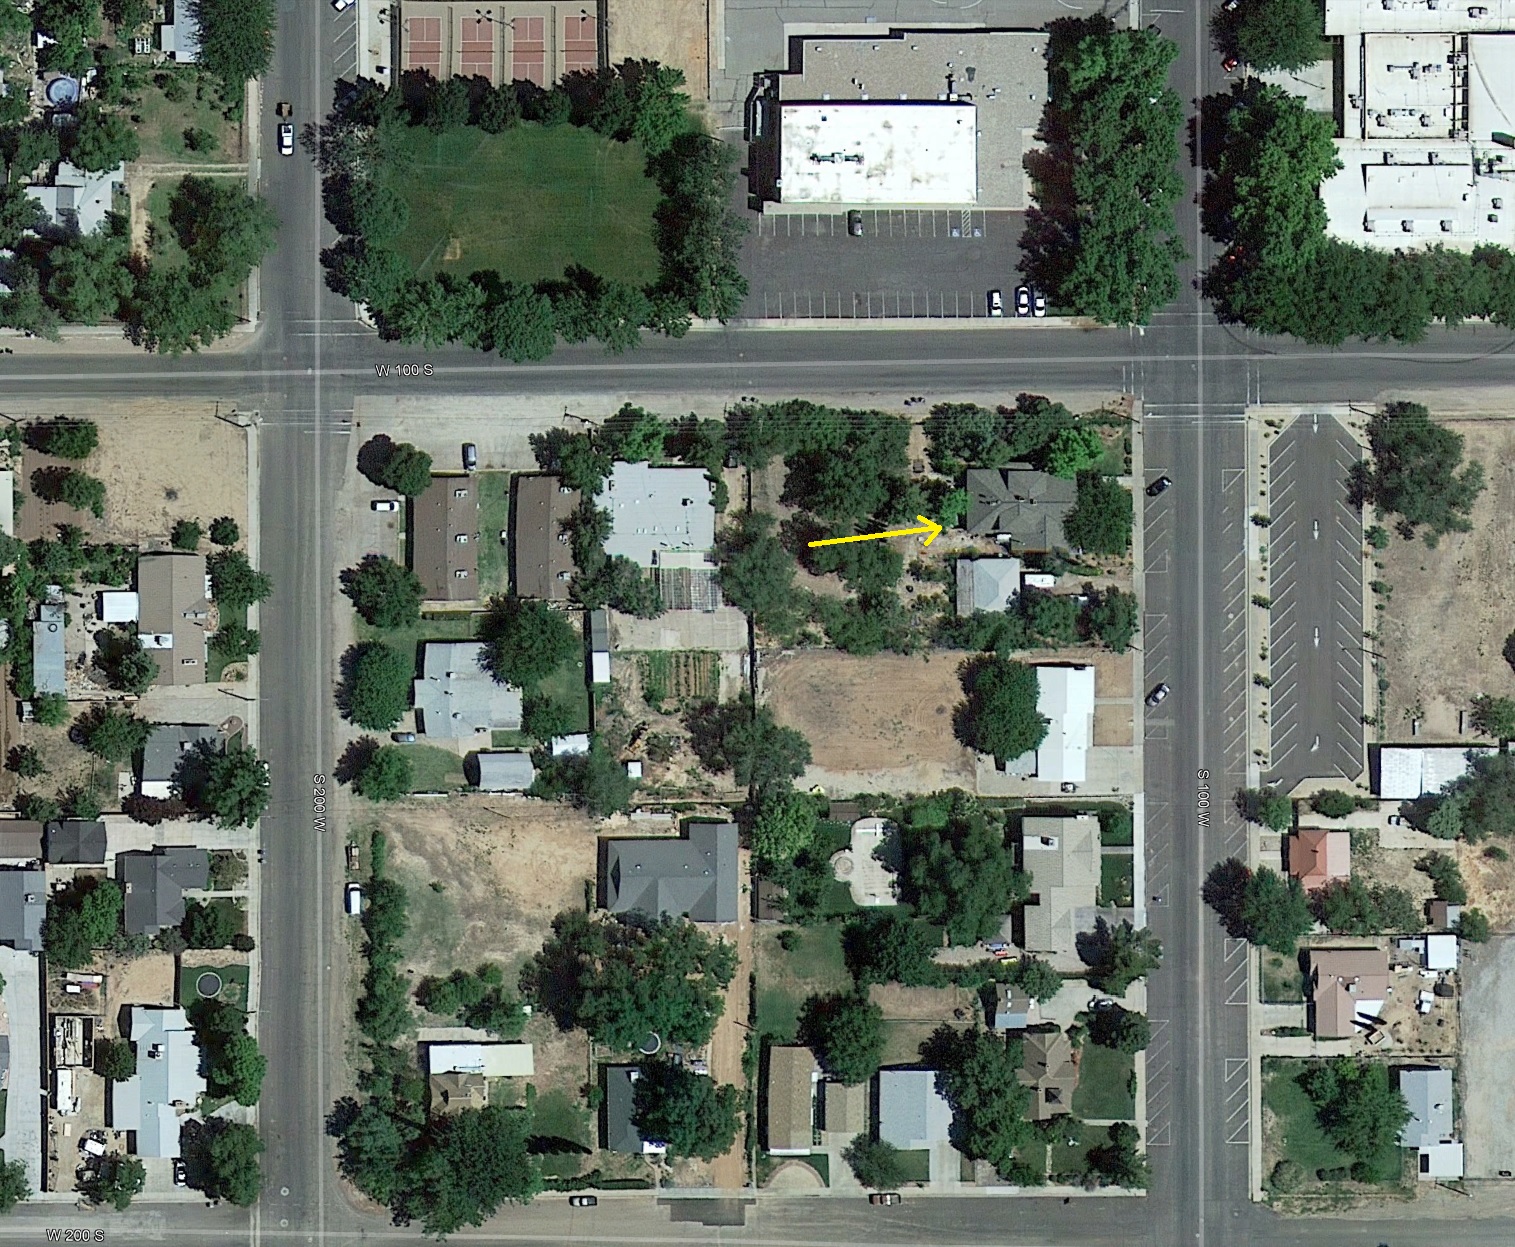 Aerial view of the old Imlay home